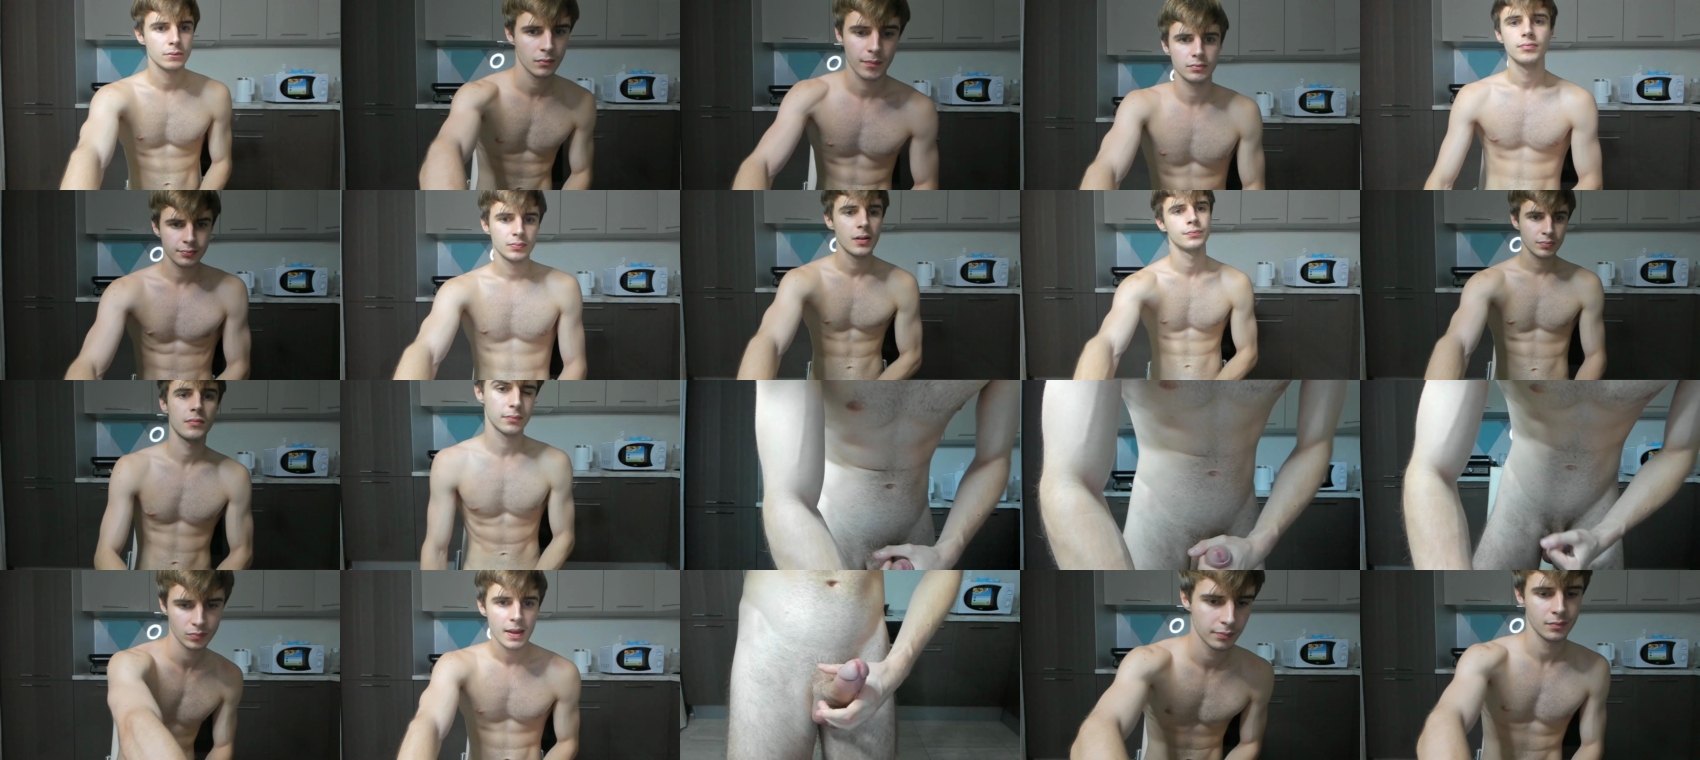 georges_place oral CAM SHOW @ Chaturbate 13-11-2022